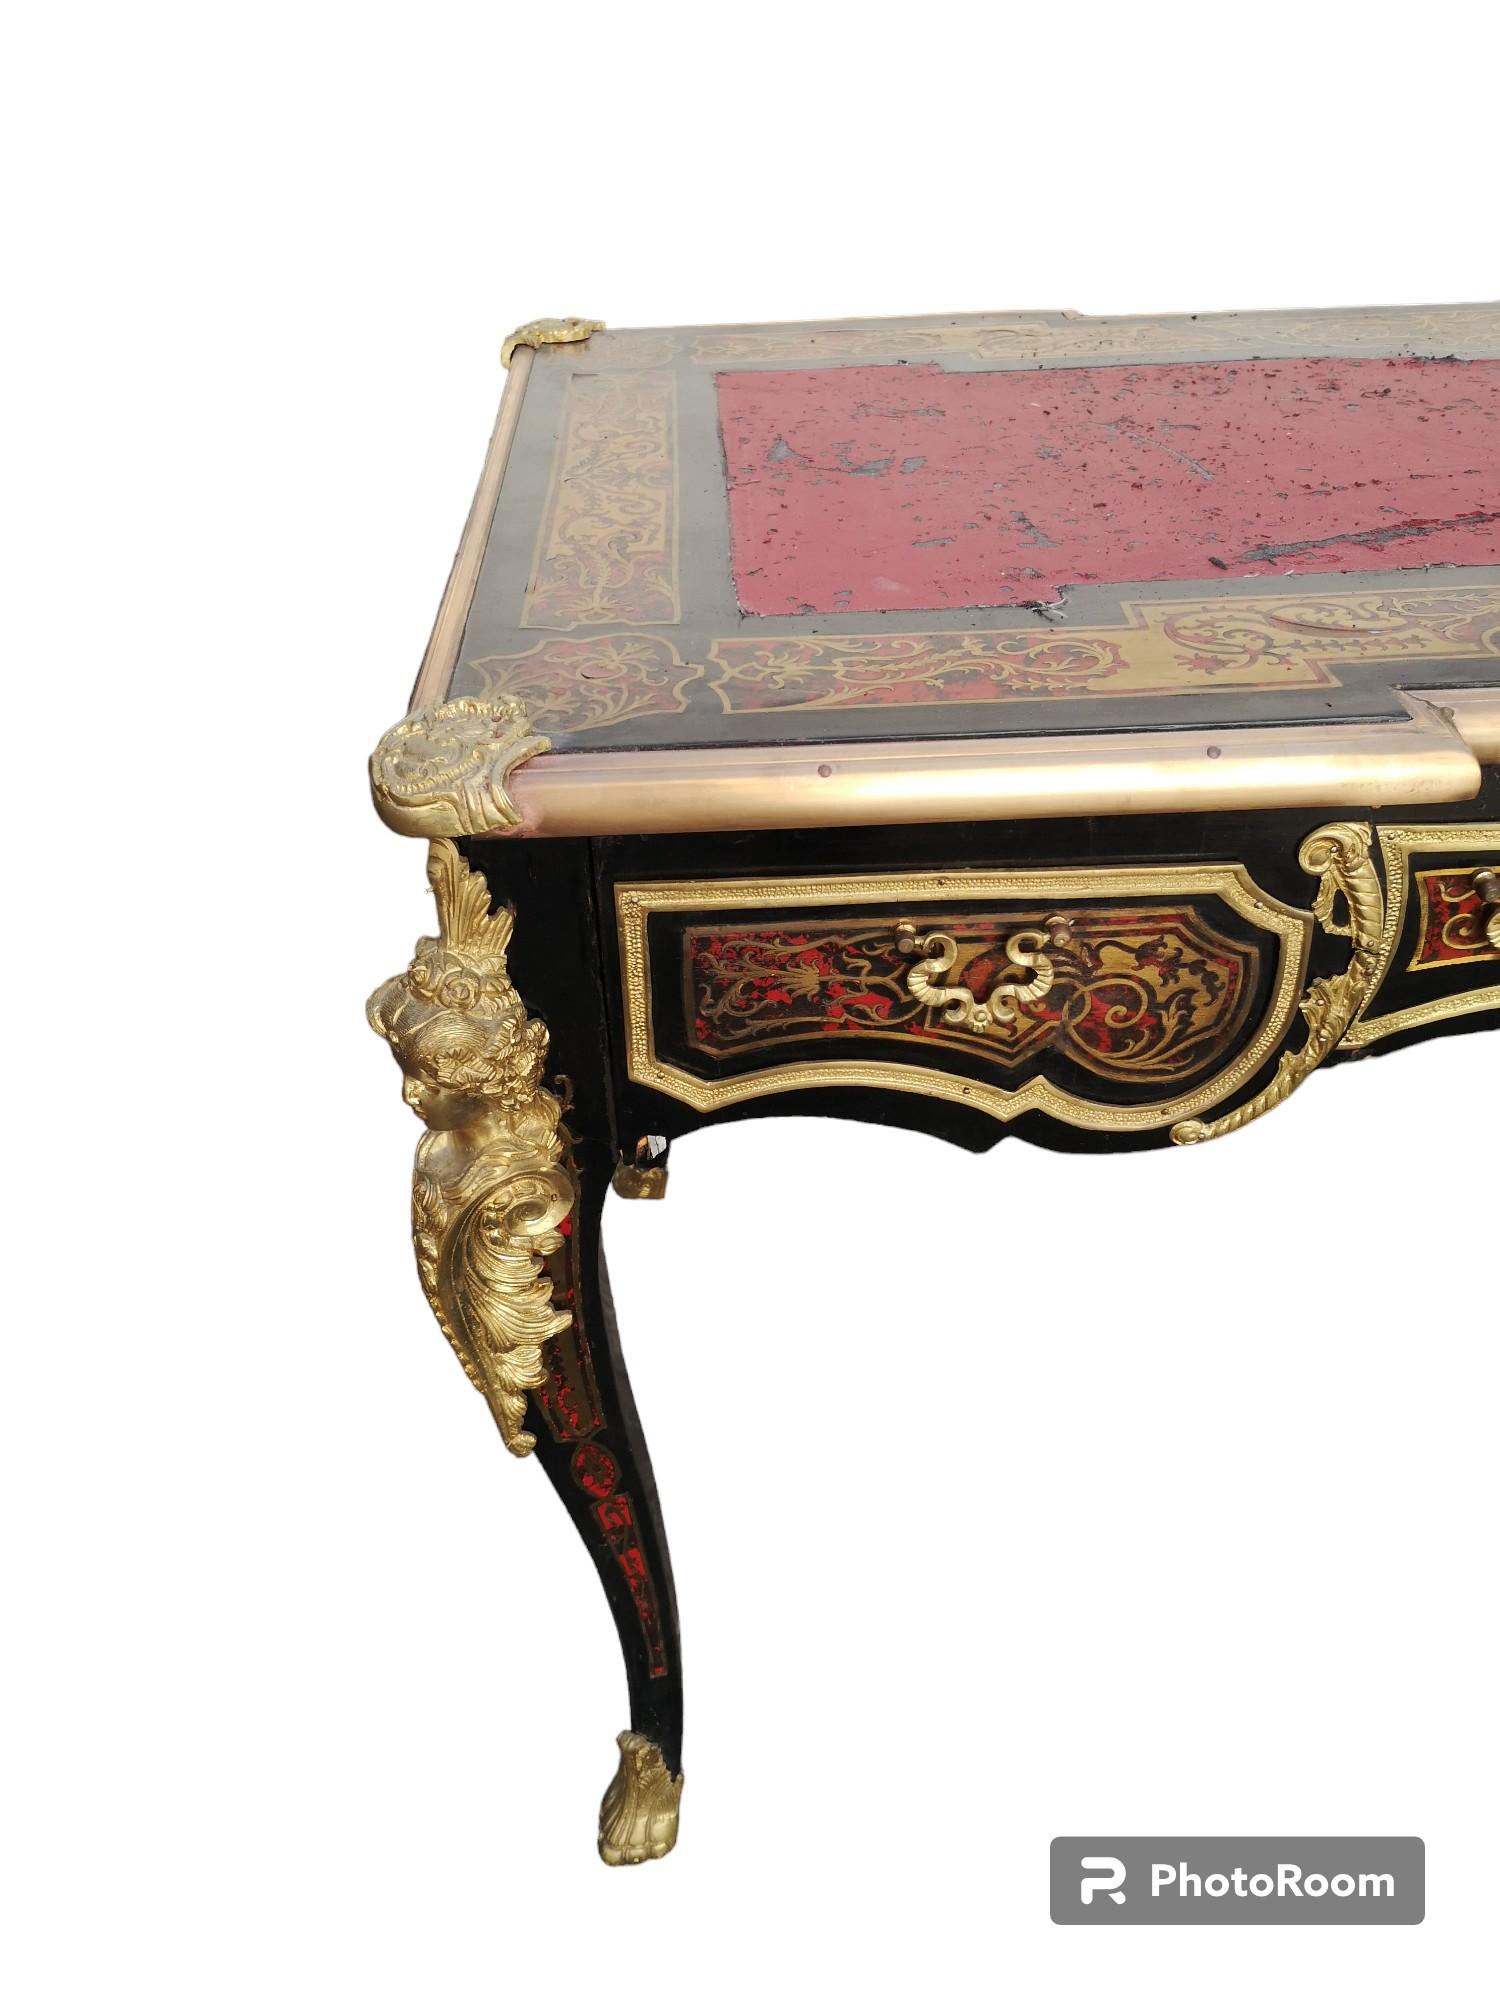 Vintage desk in the Louis XV style  with decorations and inlays
lacquered wood and gilt bronzes, with 3 capacious drawers.
In good condition, writing surface to be re-done.